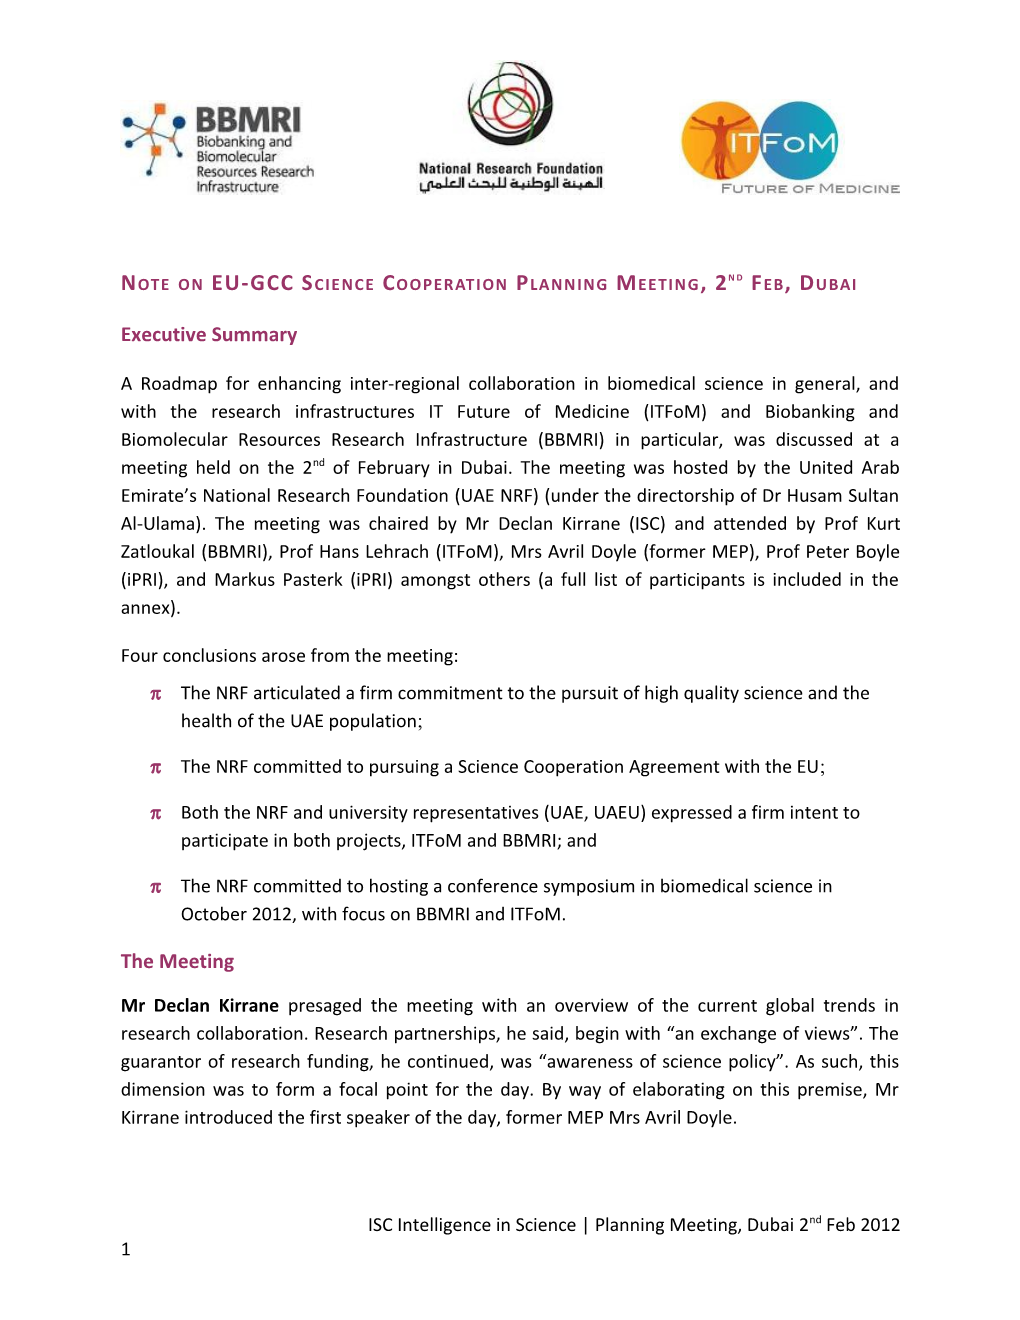 Note on EU-GCC Science Cooperation Planning Meeting, 2Nd Feb, Dubai